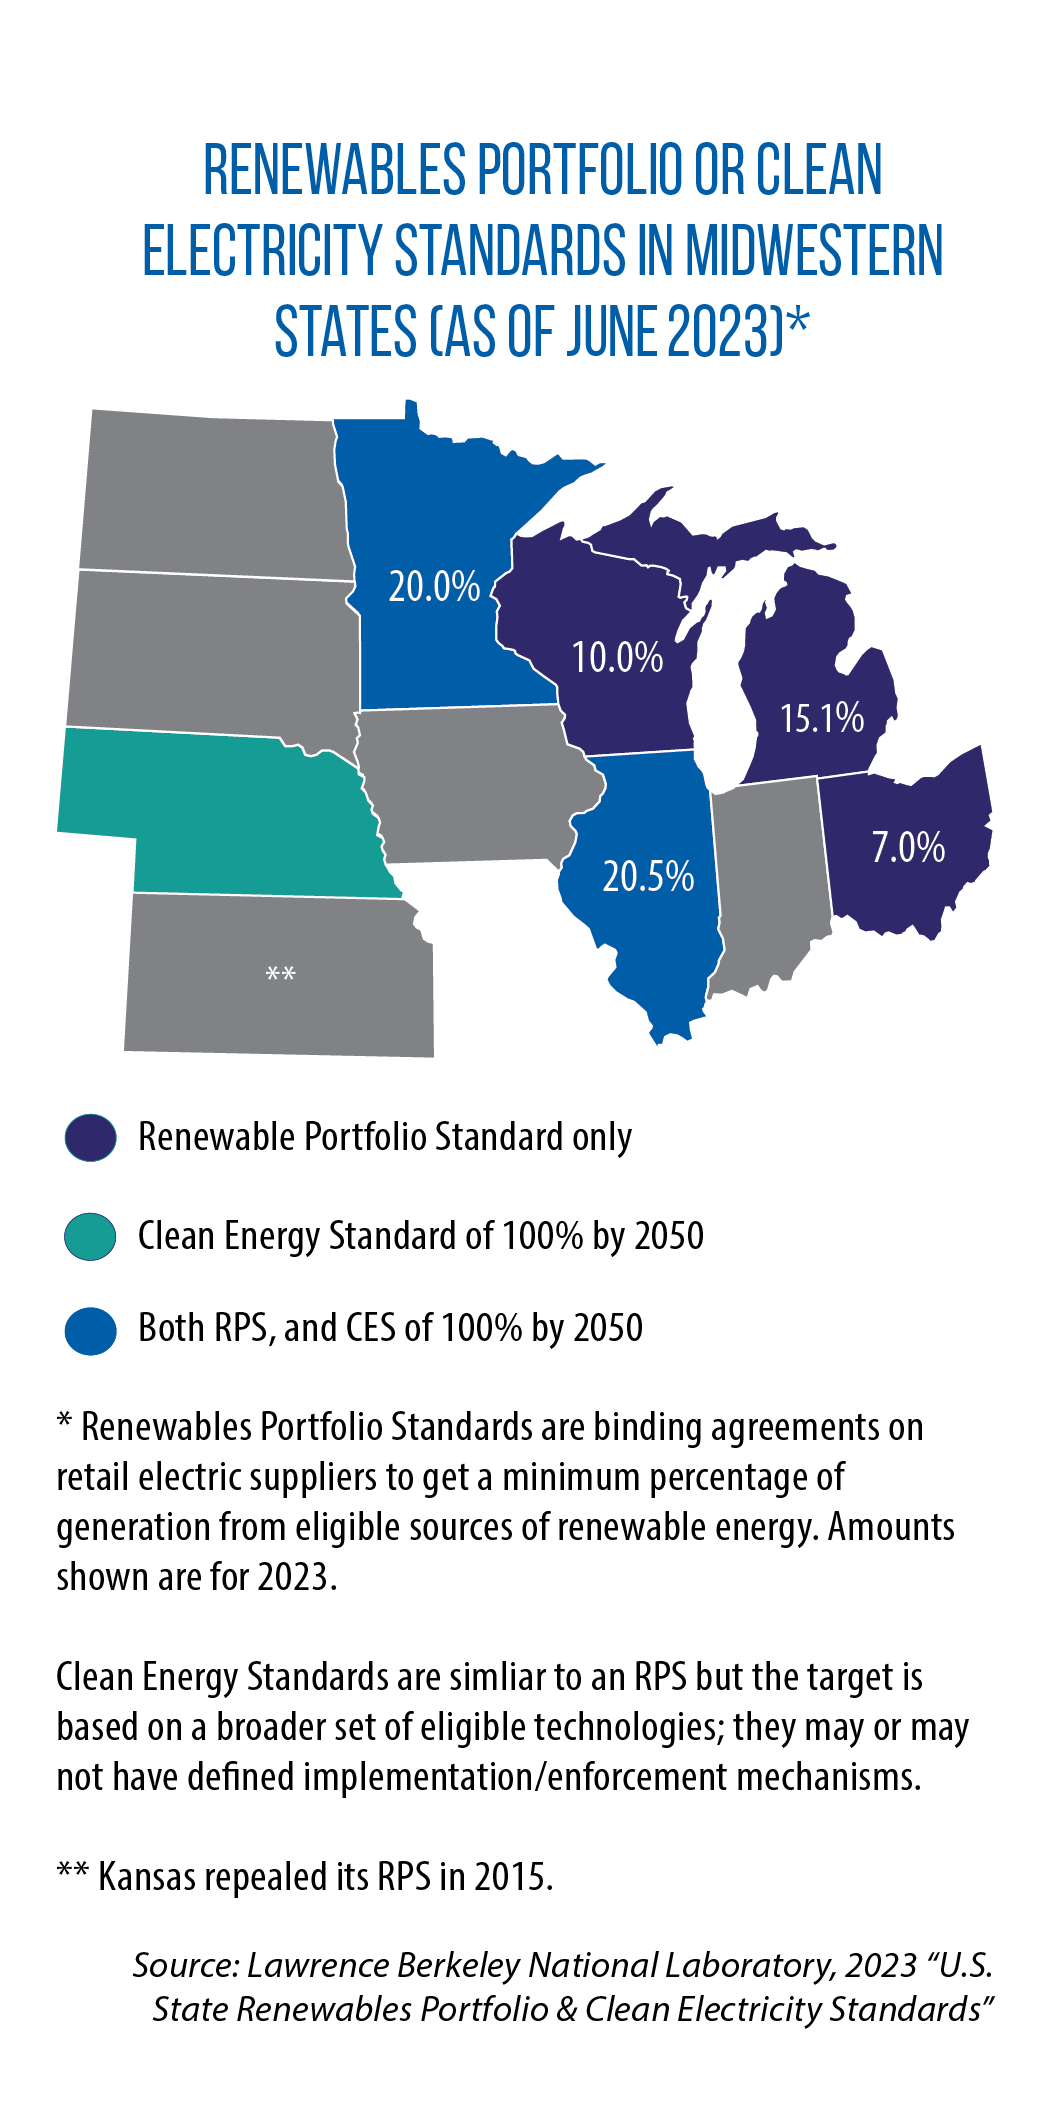 Map of Midwestern states' renewable energy portfolios or clean energy standards as of June 2023